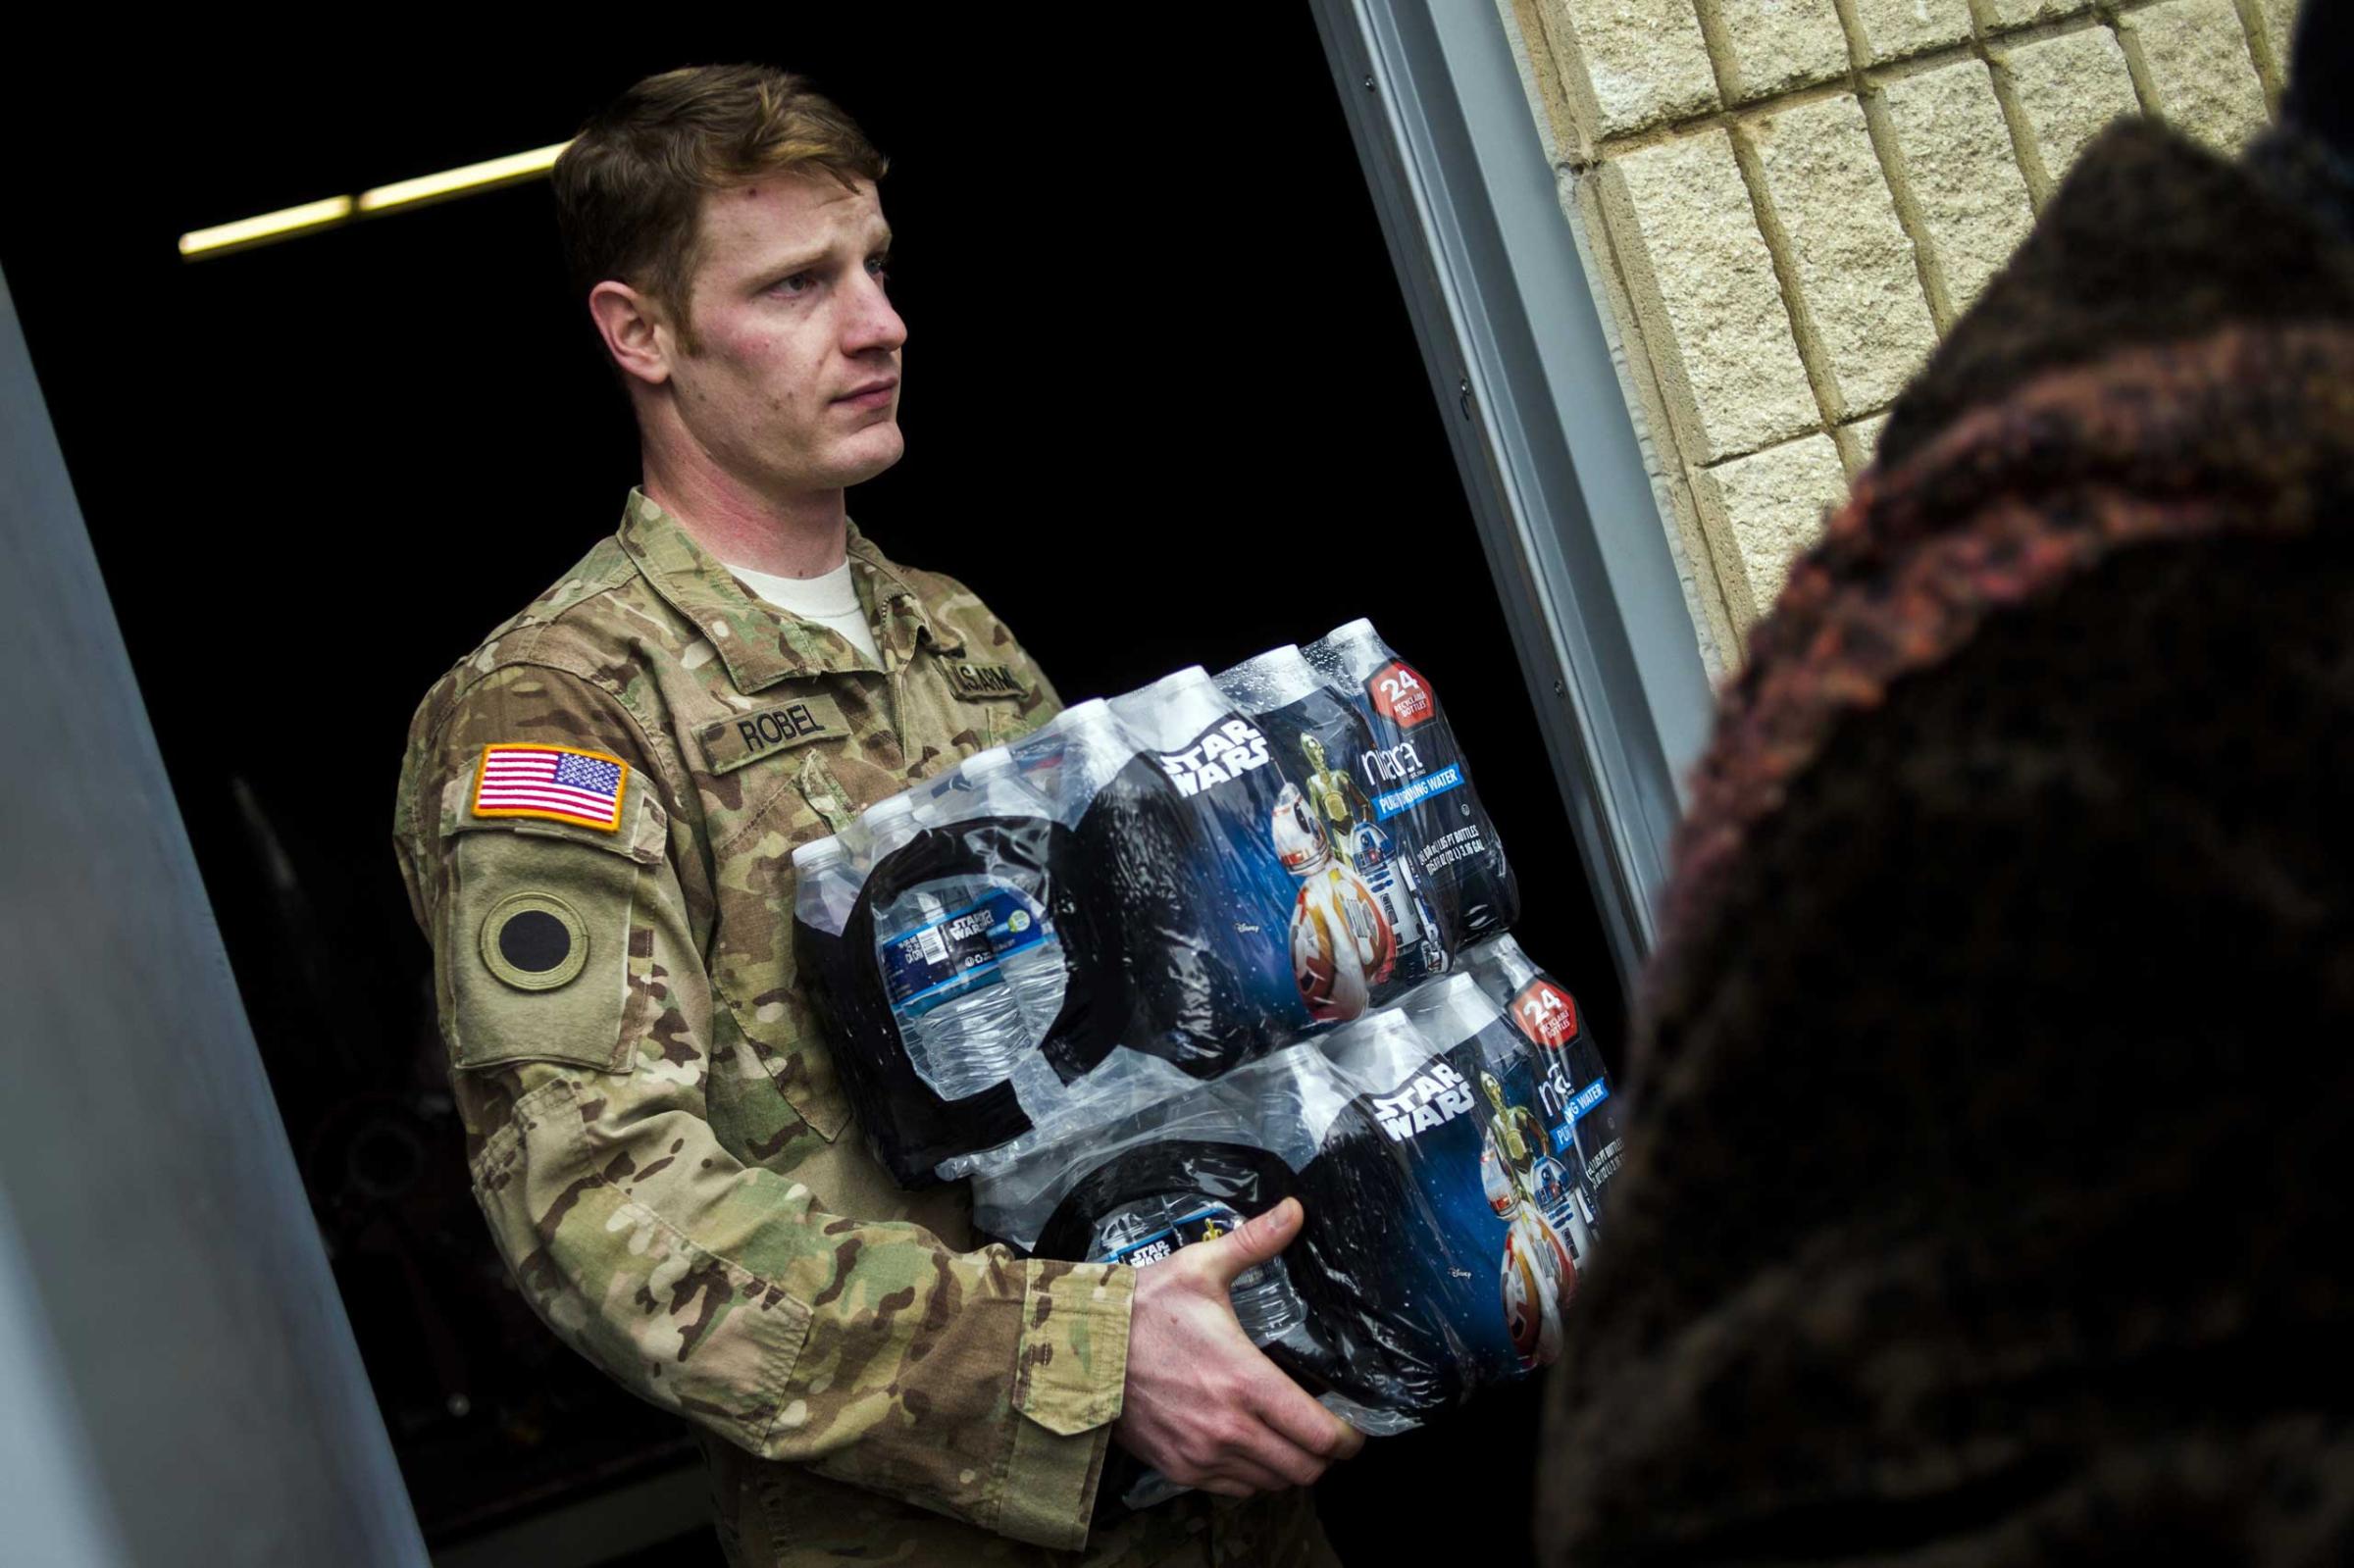 Michigan National Guard Staff Sgt. Stephen Robel helps carry a case of water to the vehicle of Flint resident Karand Houston as the first seven Michigan National Guard soldiers arrive on the ground at fire stations on Jan. 13, 2015 throughout Flint, assigned by Gov. Rick Snyder on Tuesday to help distribute water and relieve residents in relation to the Flint water crisis. Safe drinking water has not flowed from many Flint faucets for almost two years after the state-run city switched its source to the highly corrosive Flint River and failed to treat it properly to protect lead from leaching into it.